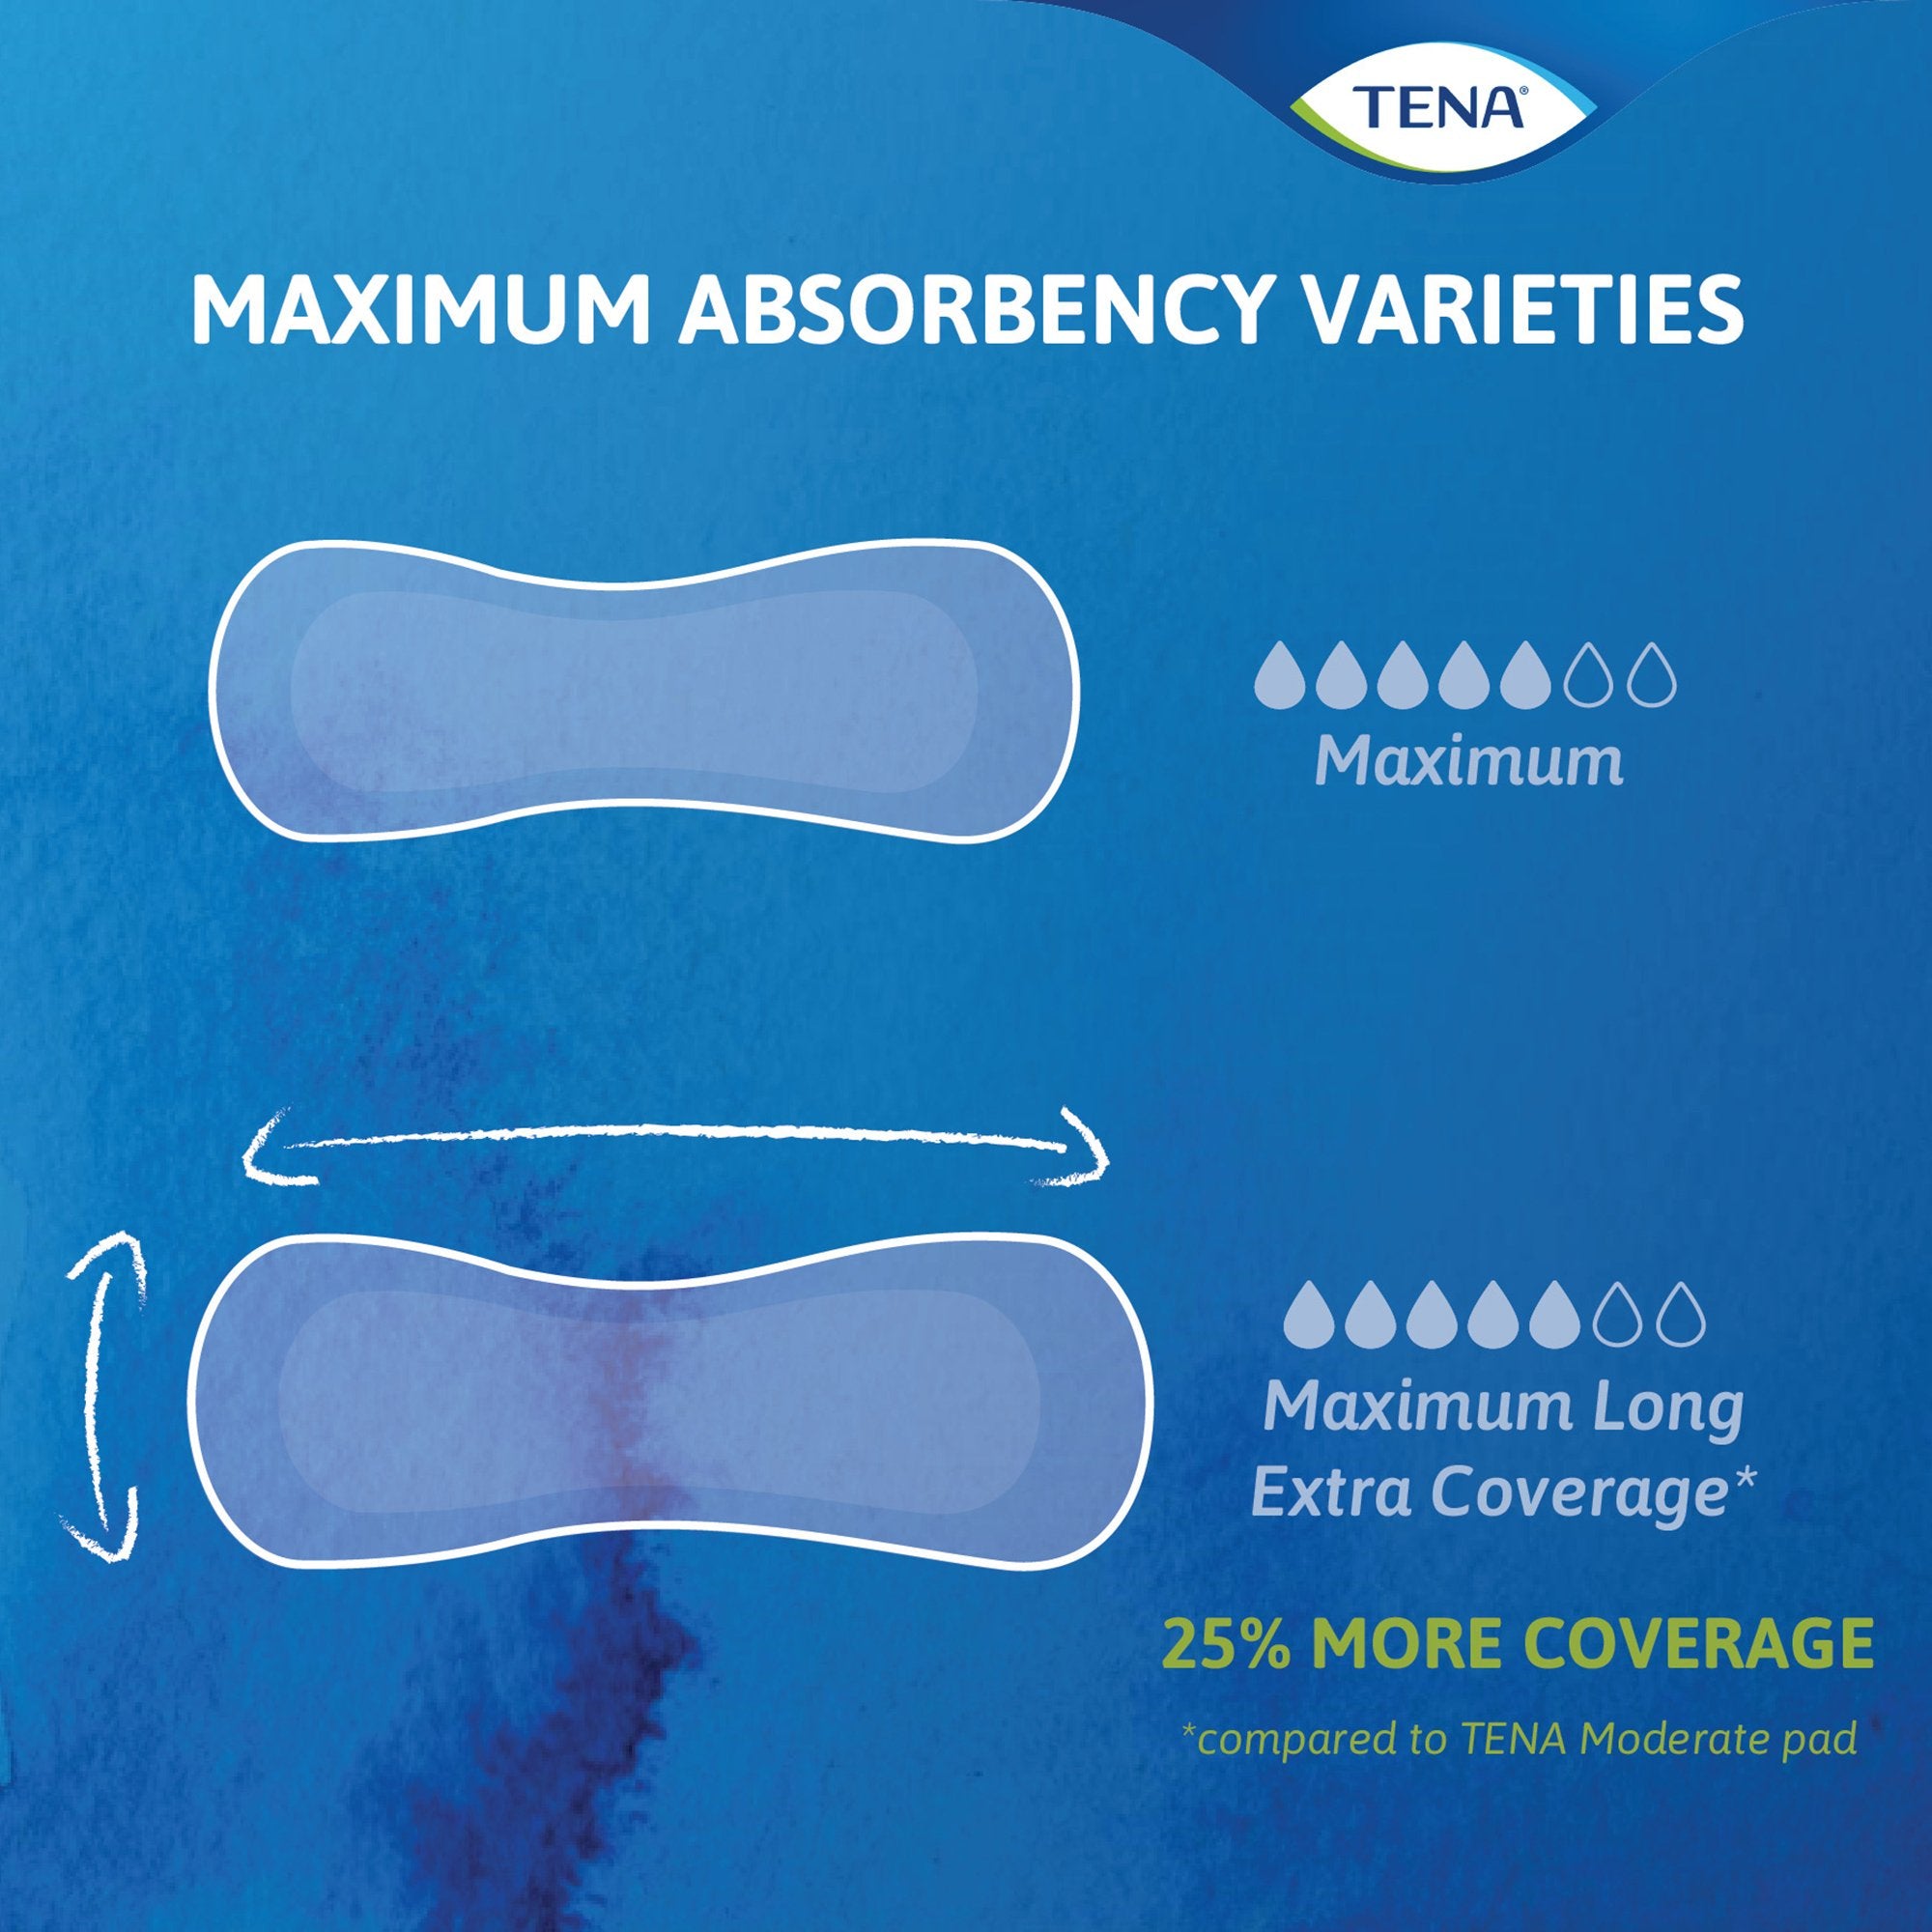 Bladder Control Pad TENA® Sensitive Care Ultimate 16 Inch Length Heavy Absorbency Dry-Fast Core™ One Size Fits Most